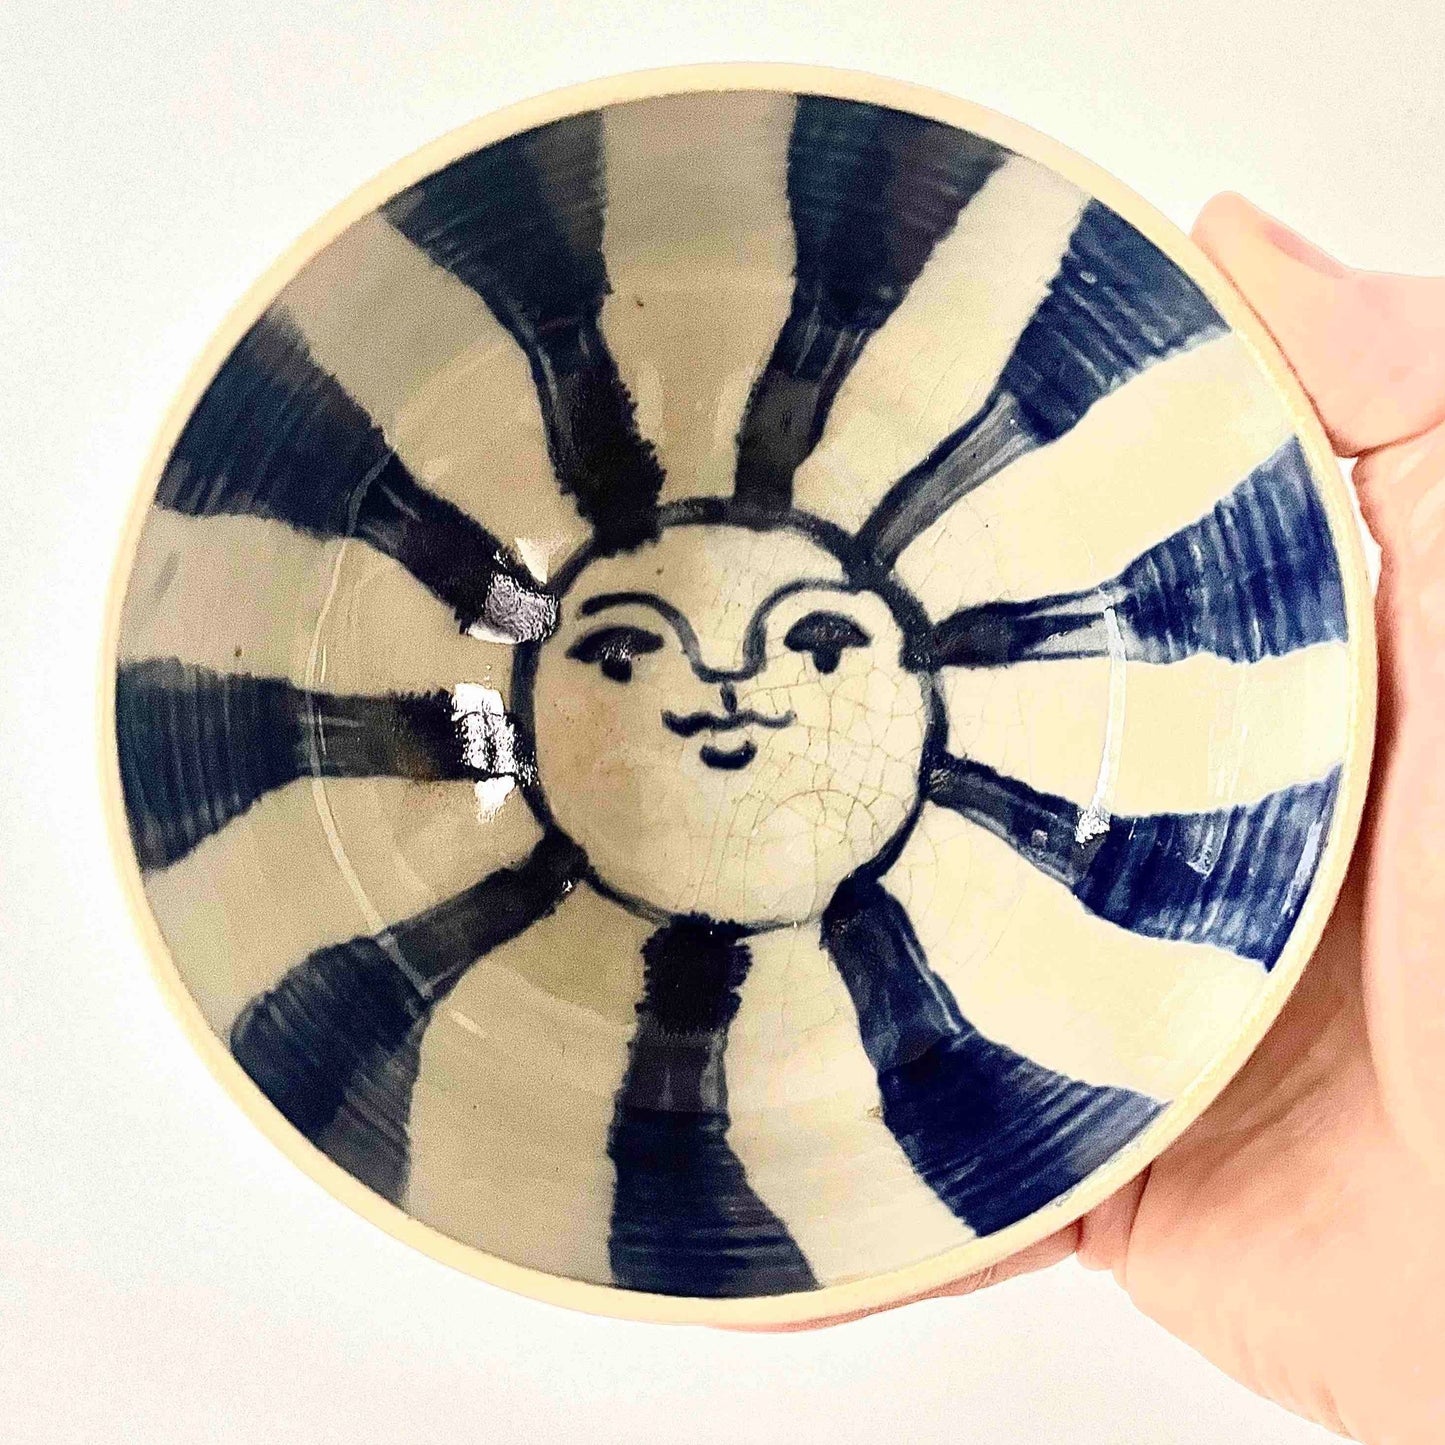 White stoneware bowl, wheel-thrown by Hey moon ceramics. Hand-painted on the interior with a blue sun which has a face. Clear glaze on inside only. Food safe